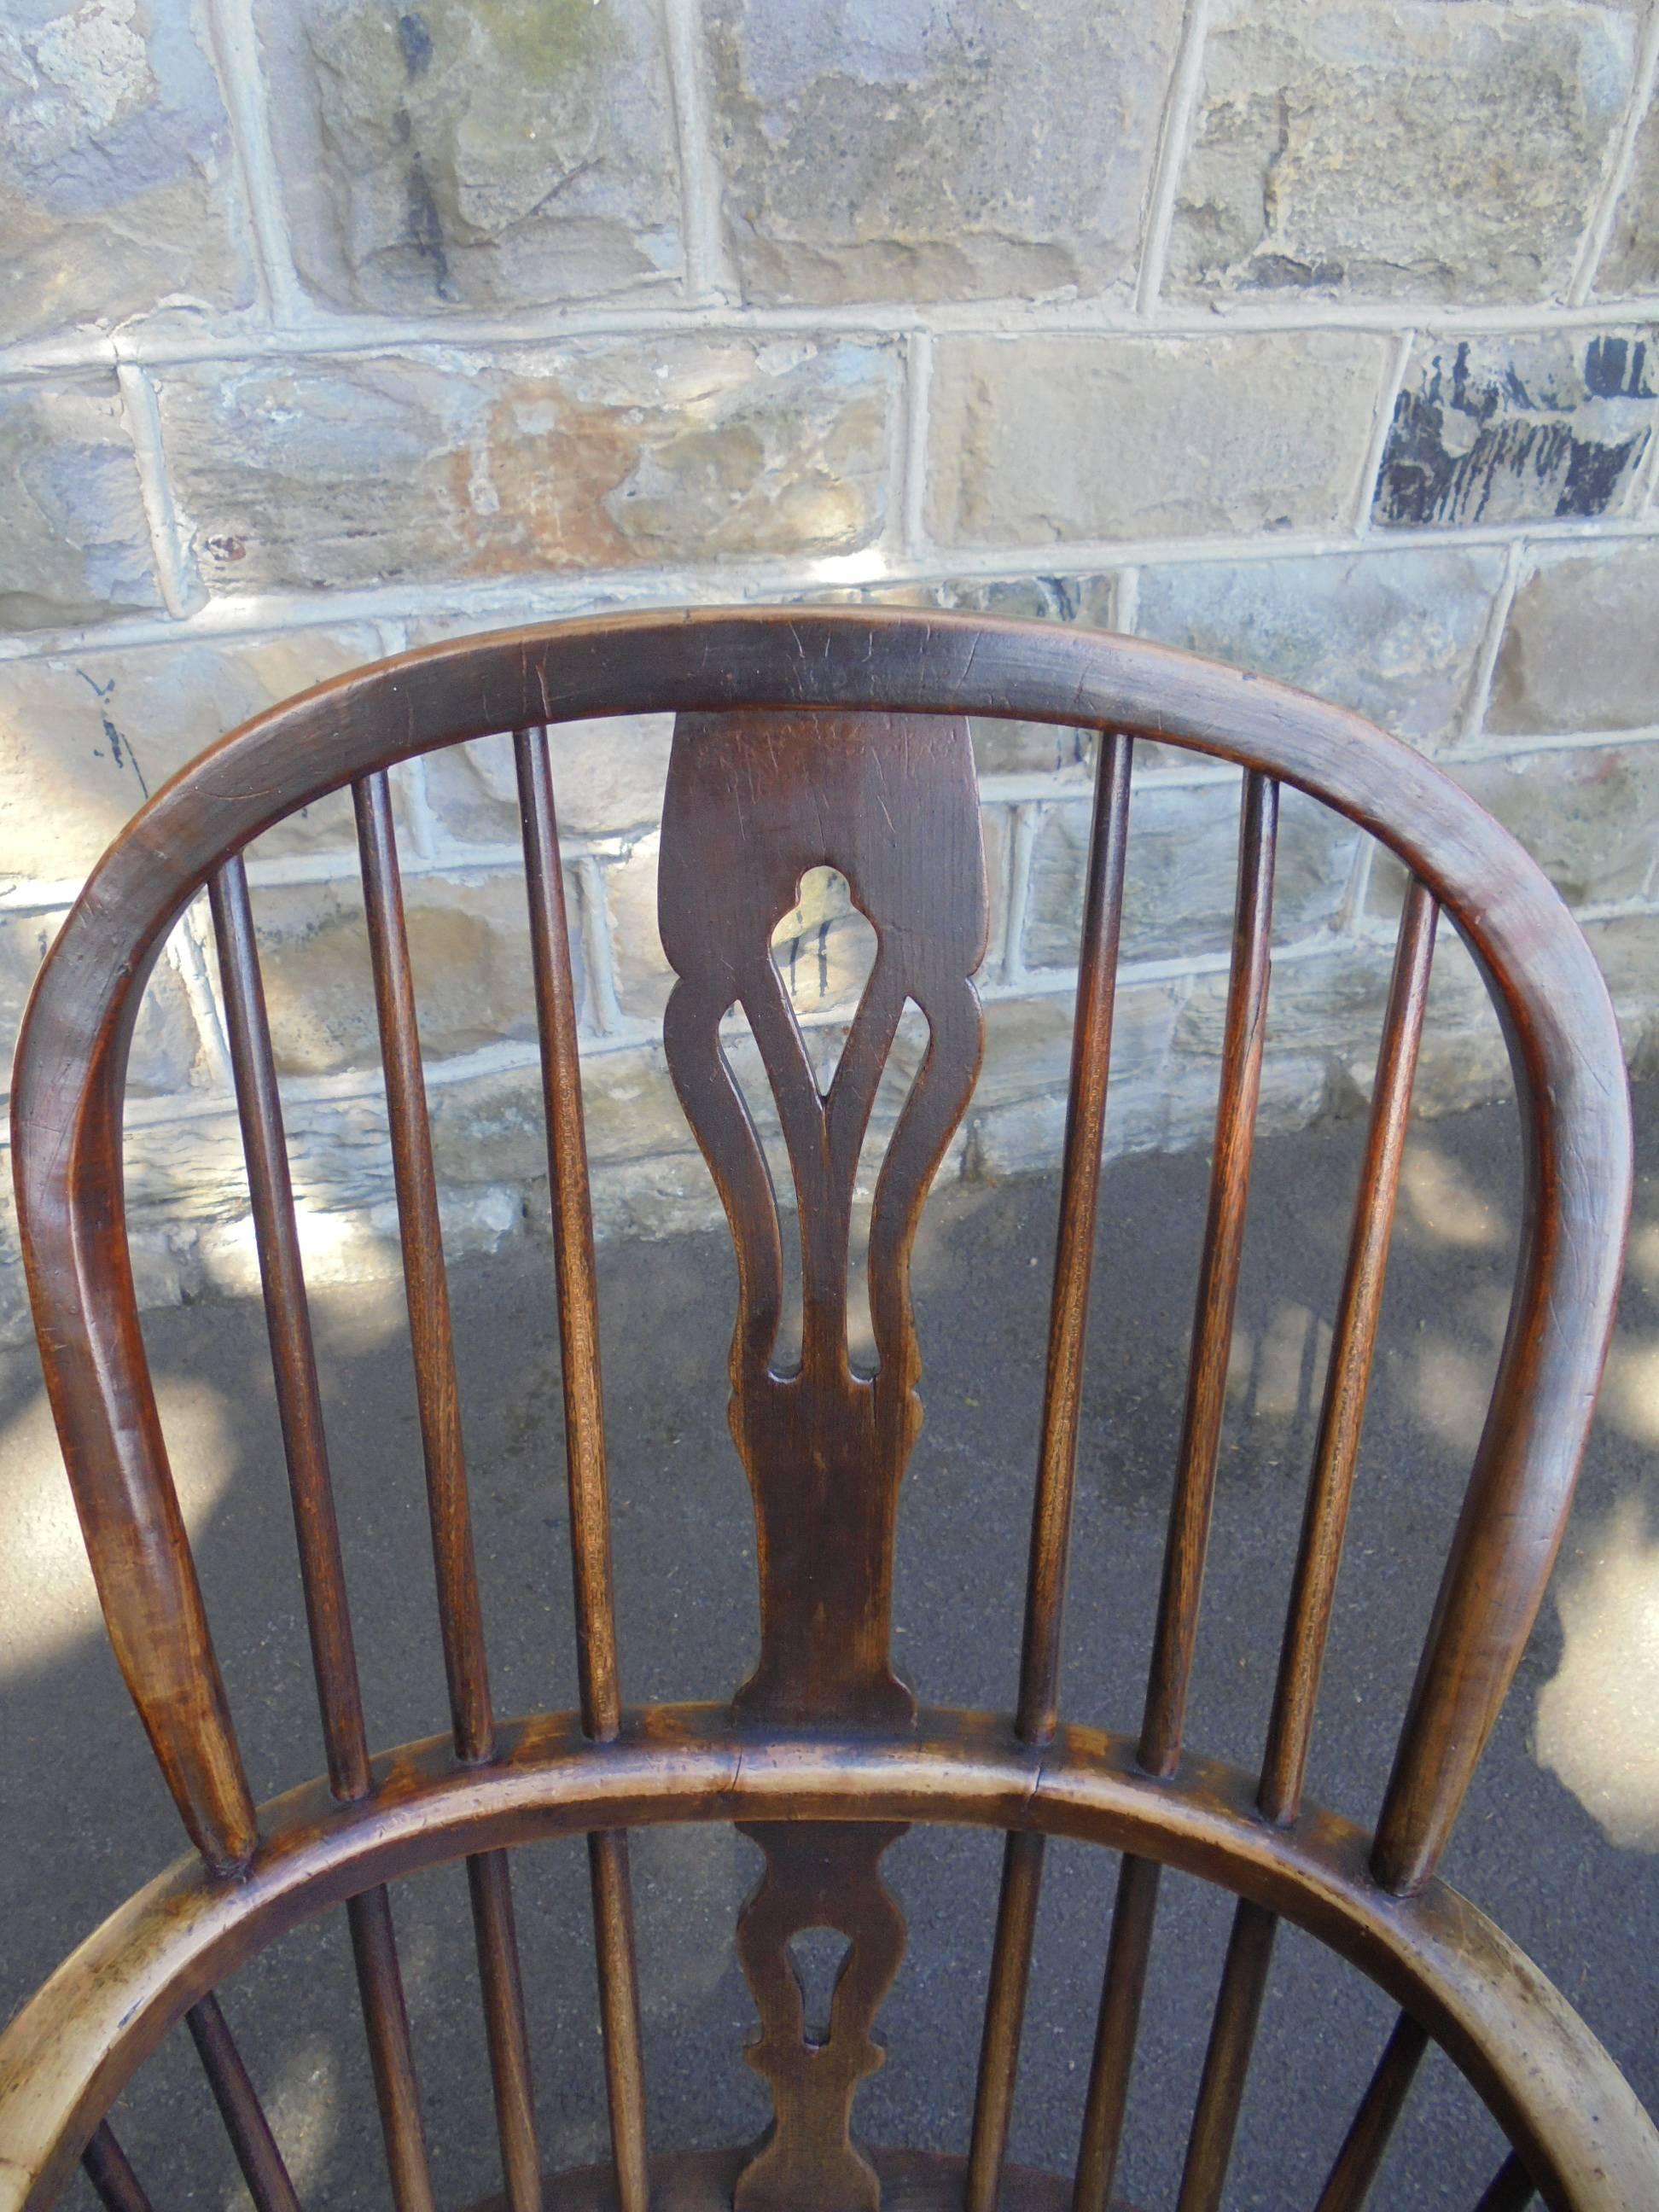 Offered for sale is this antique windsor chair by Fred Walker Rockley

Dating from 1850. Hoop back with pierced central splat, elm spindles and turned supports, elm stick arms , elm seat standing on turned elm legs with crynolin stretcher. A nice